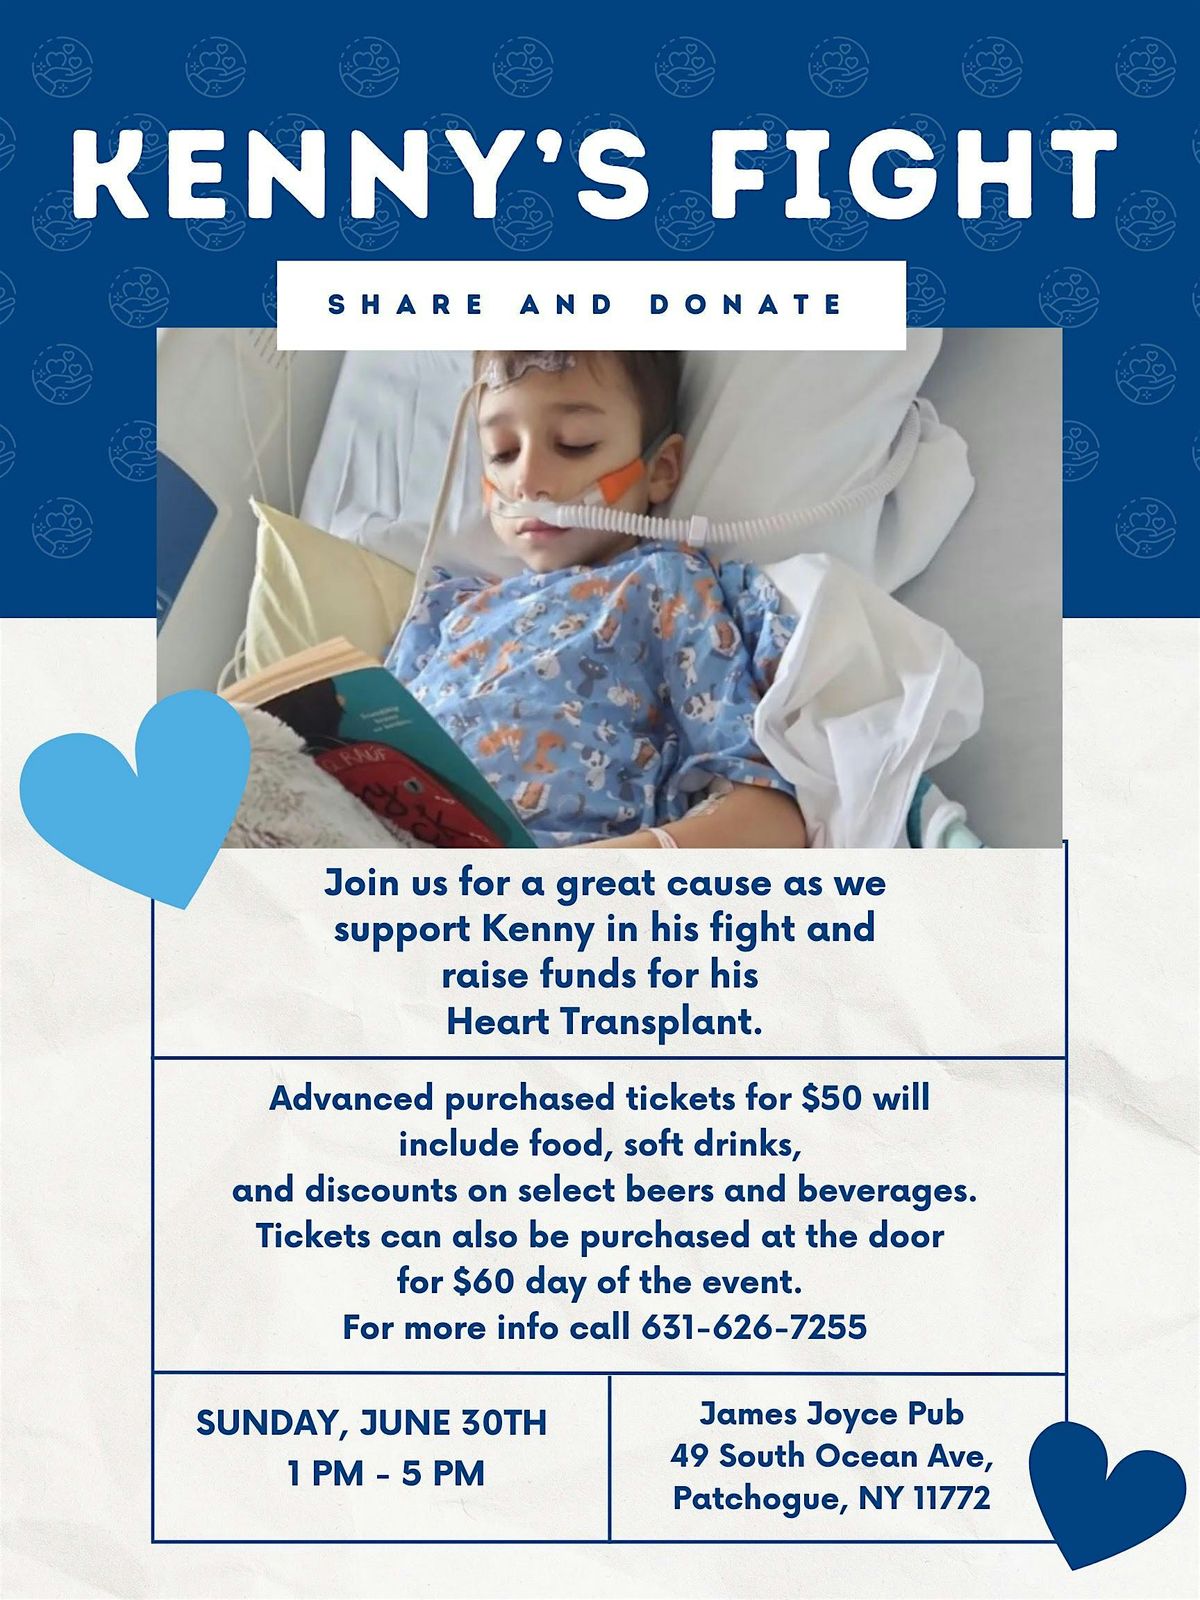 Help Support Kenny's Fight